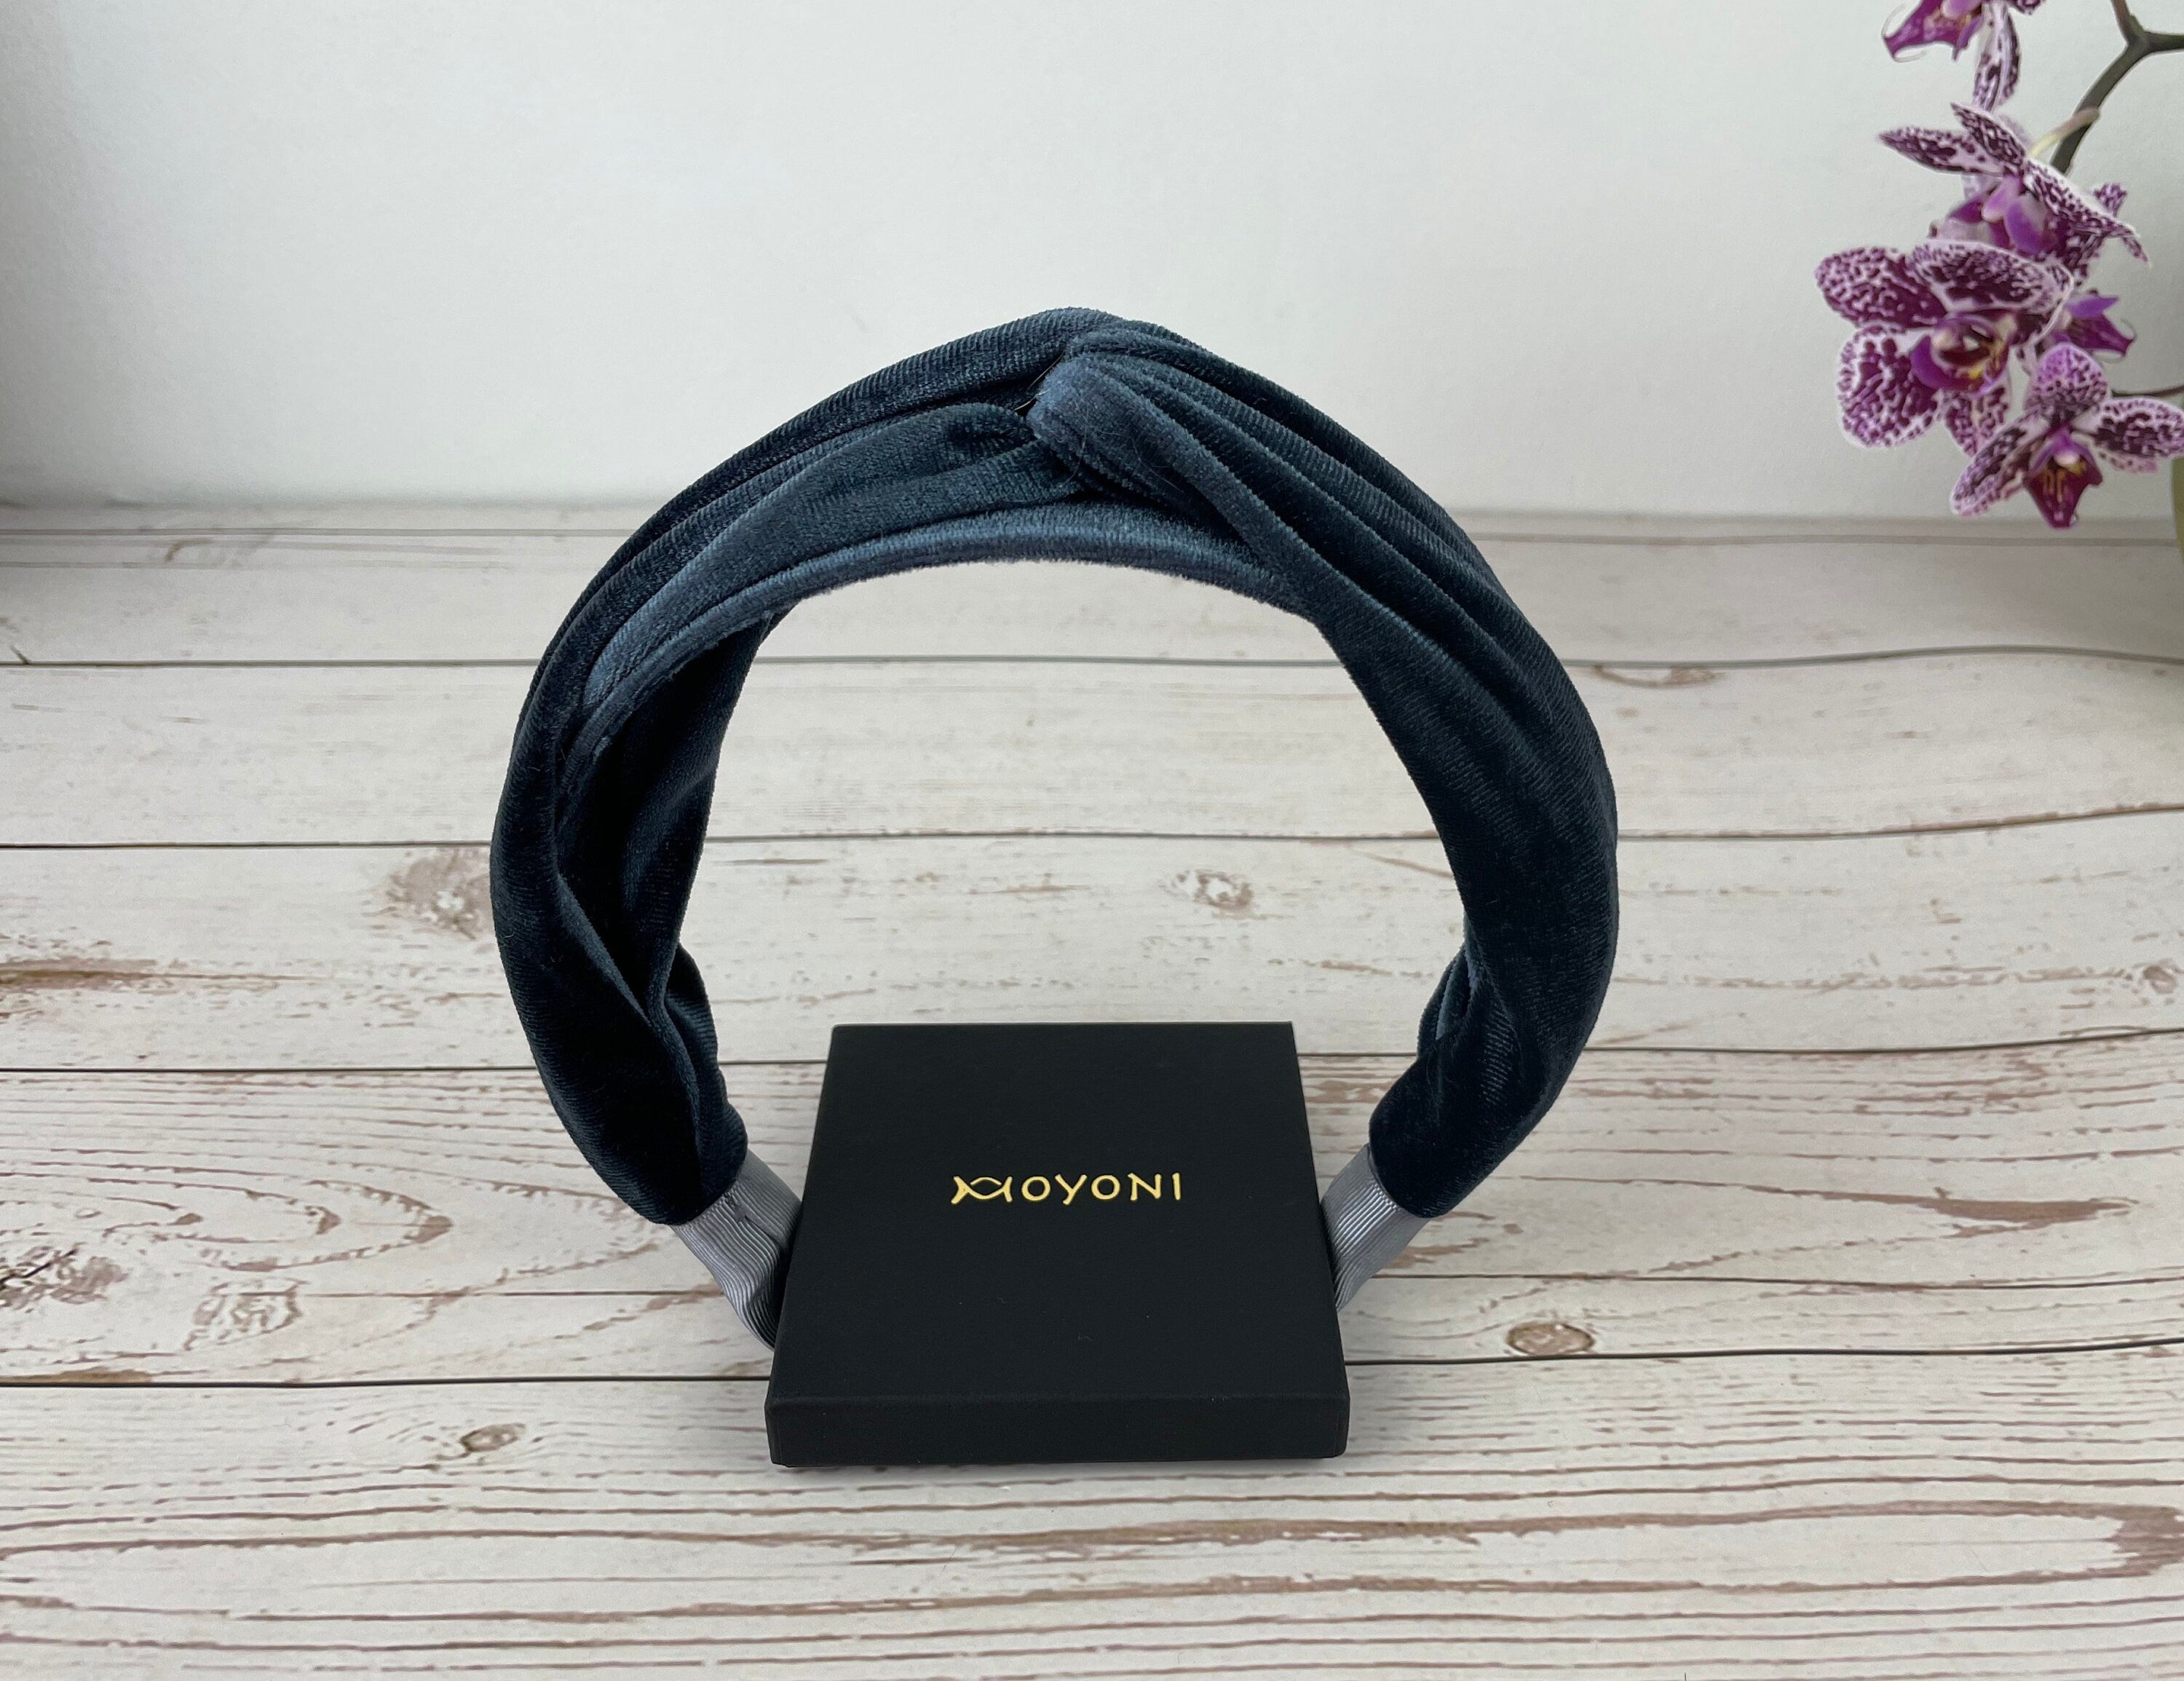 Our Headband for Women in Light Blue Velvet is the perfect accessory for any fashion-forward woman! Its sleek design and chic color make it a versatile addition to your hair accessory collection. Dress it up or down, the possibilities are endless!